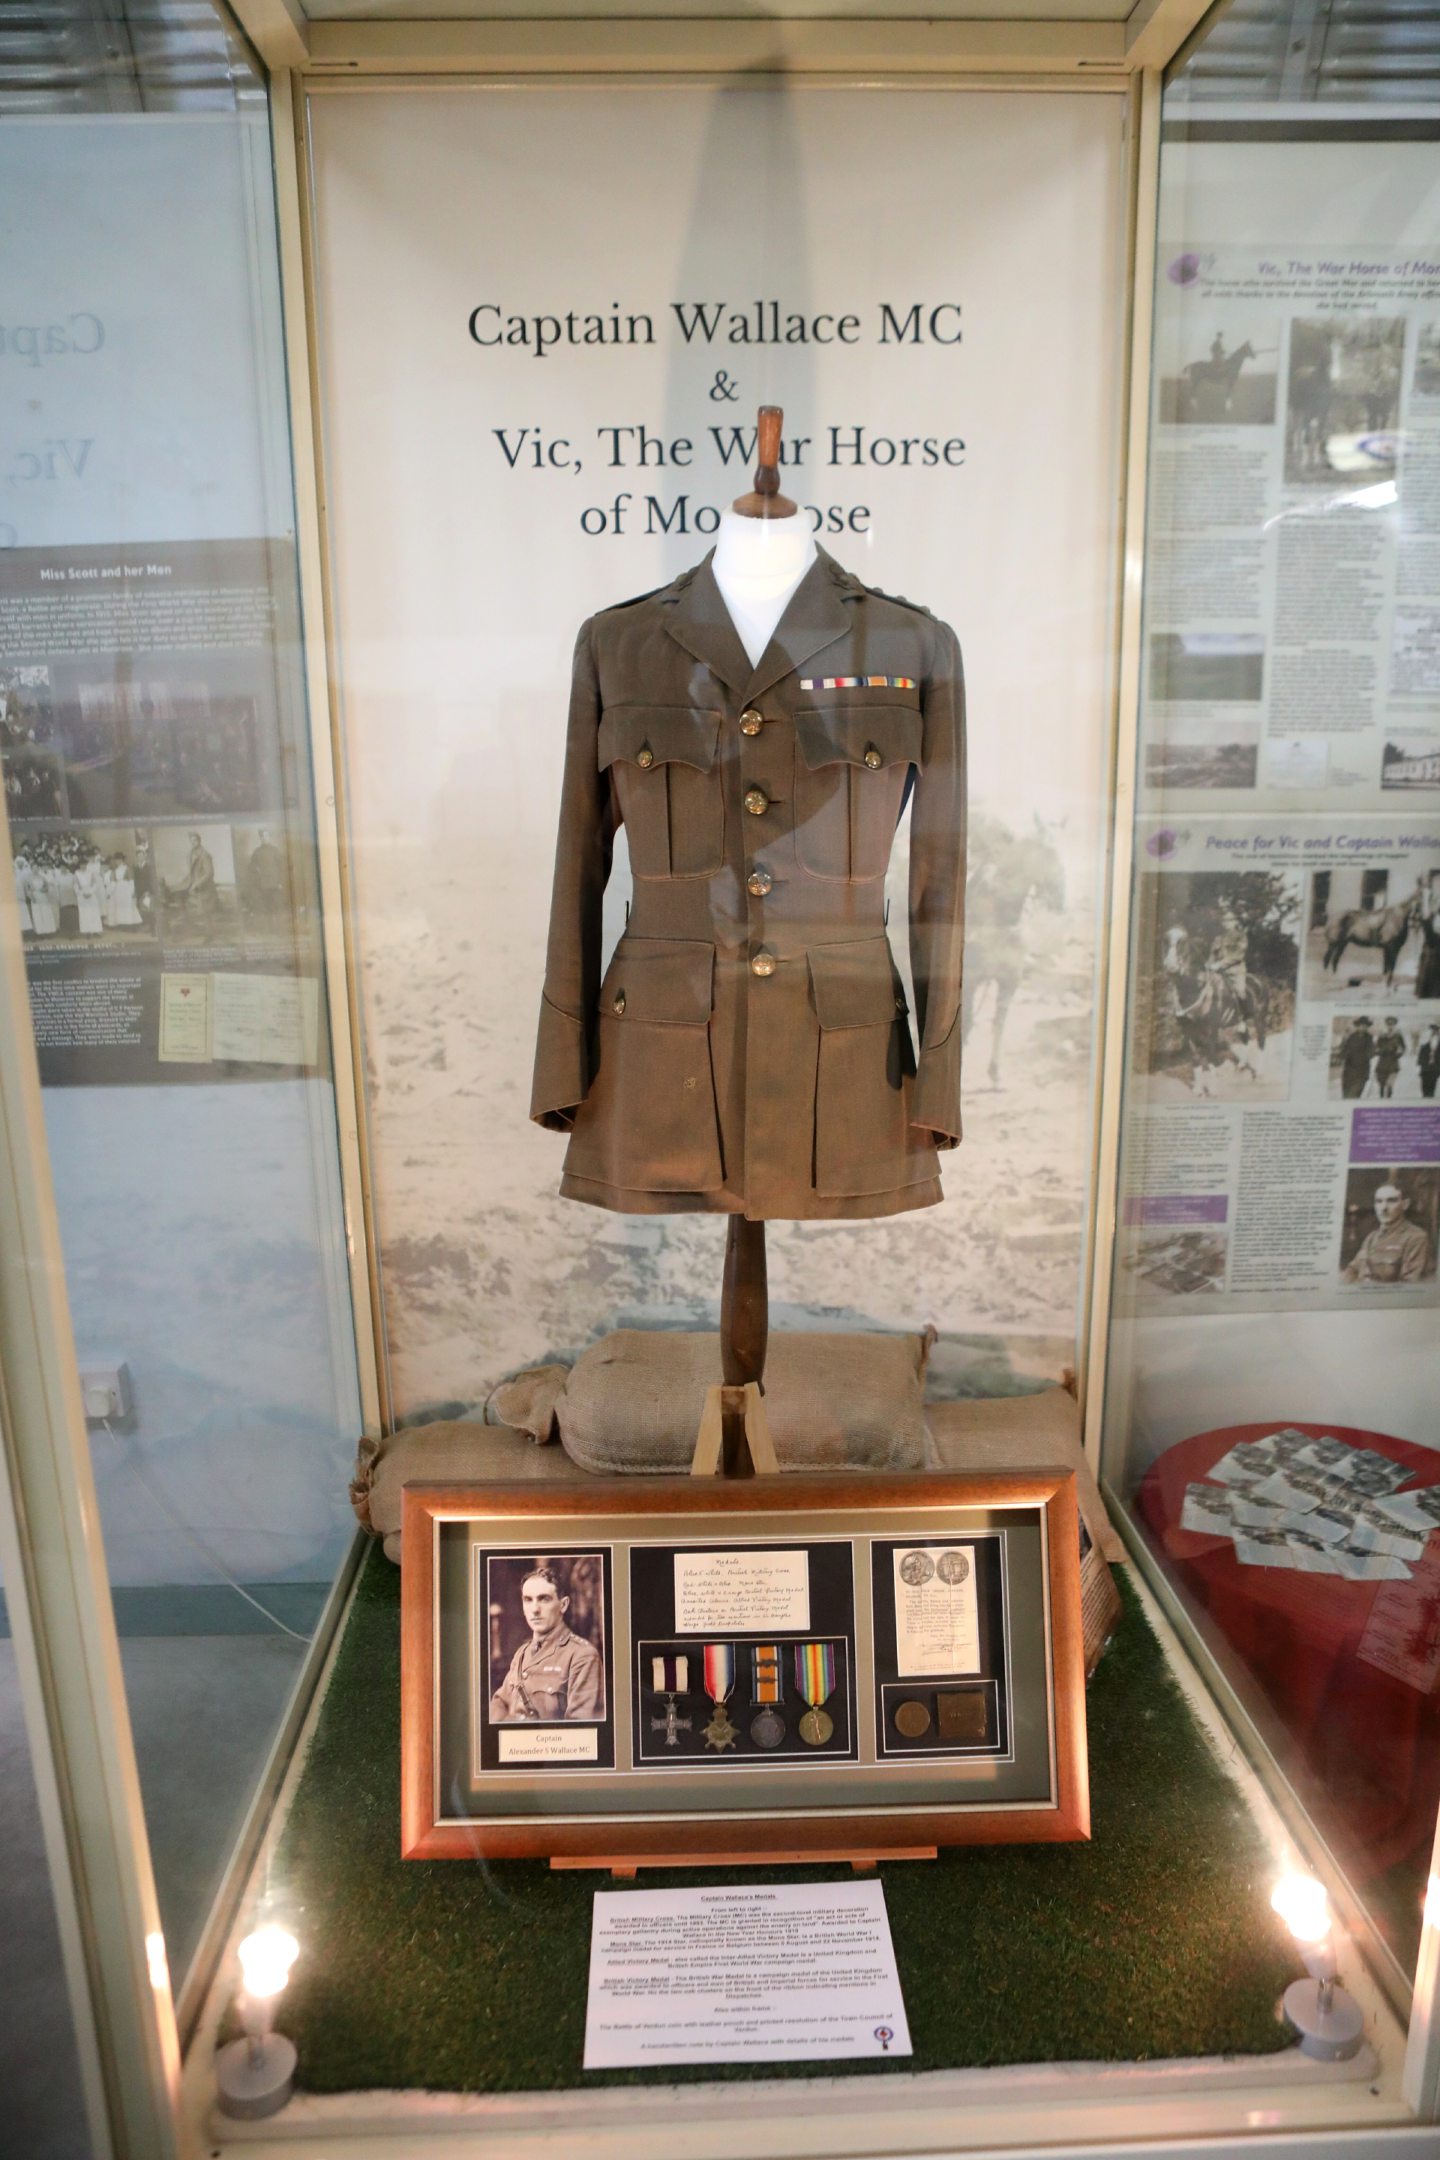 The tunic and medals on display at Montrose. Image: Gareth Jennings/DC Thomson.